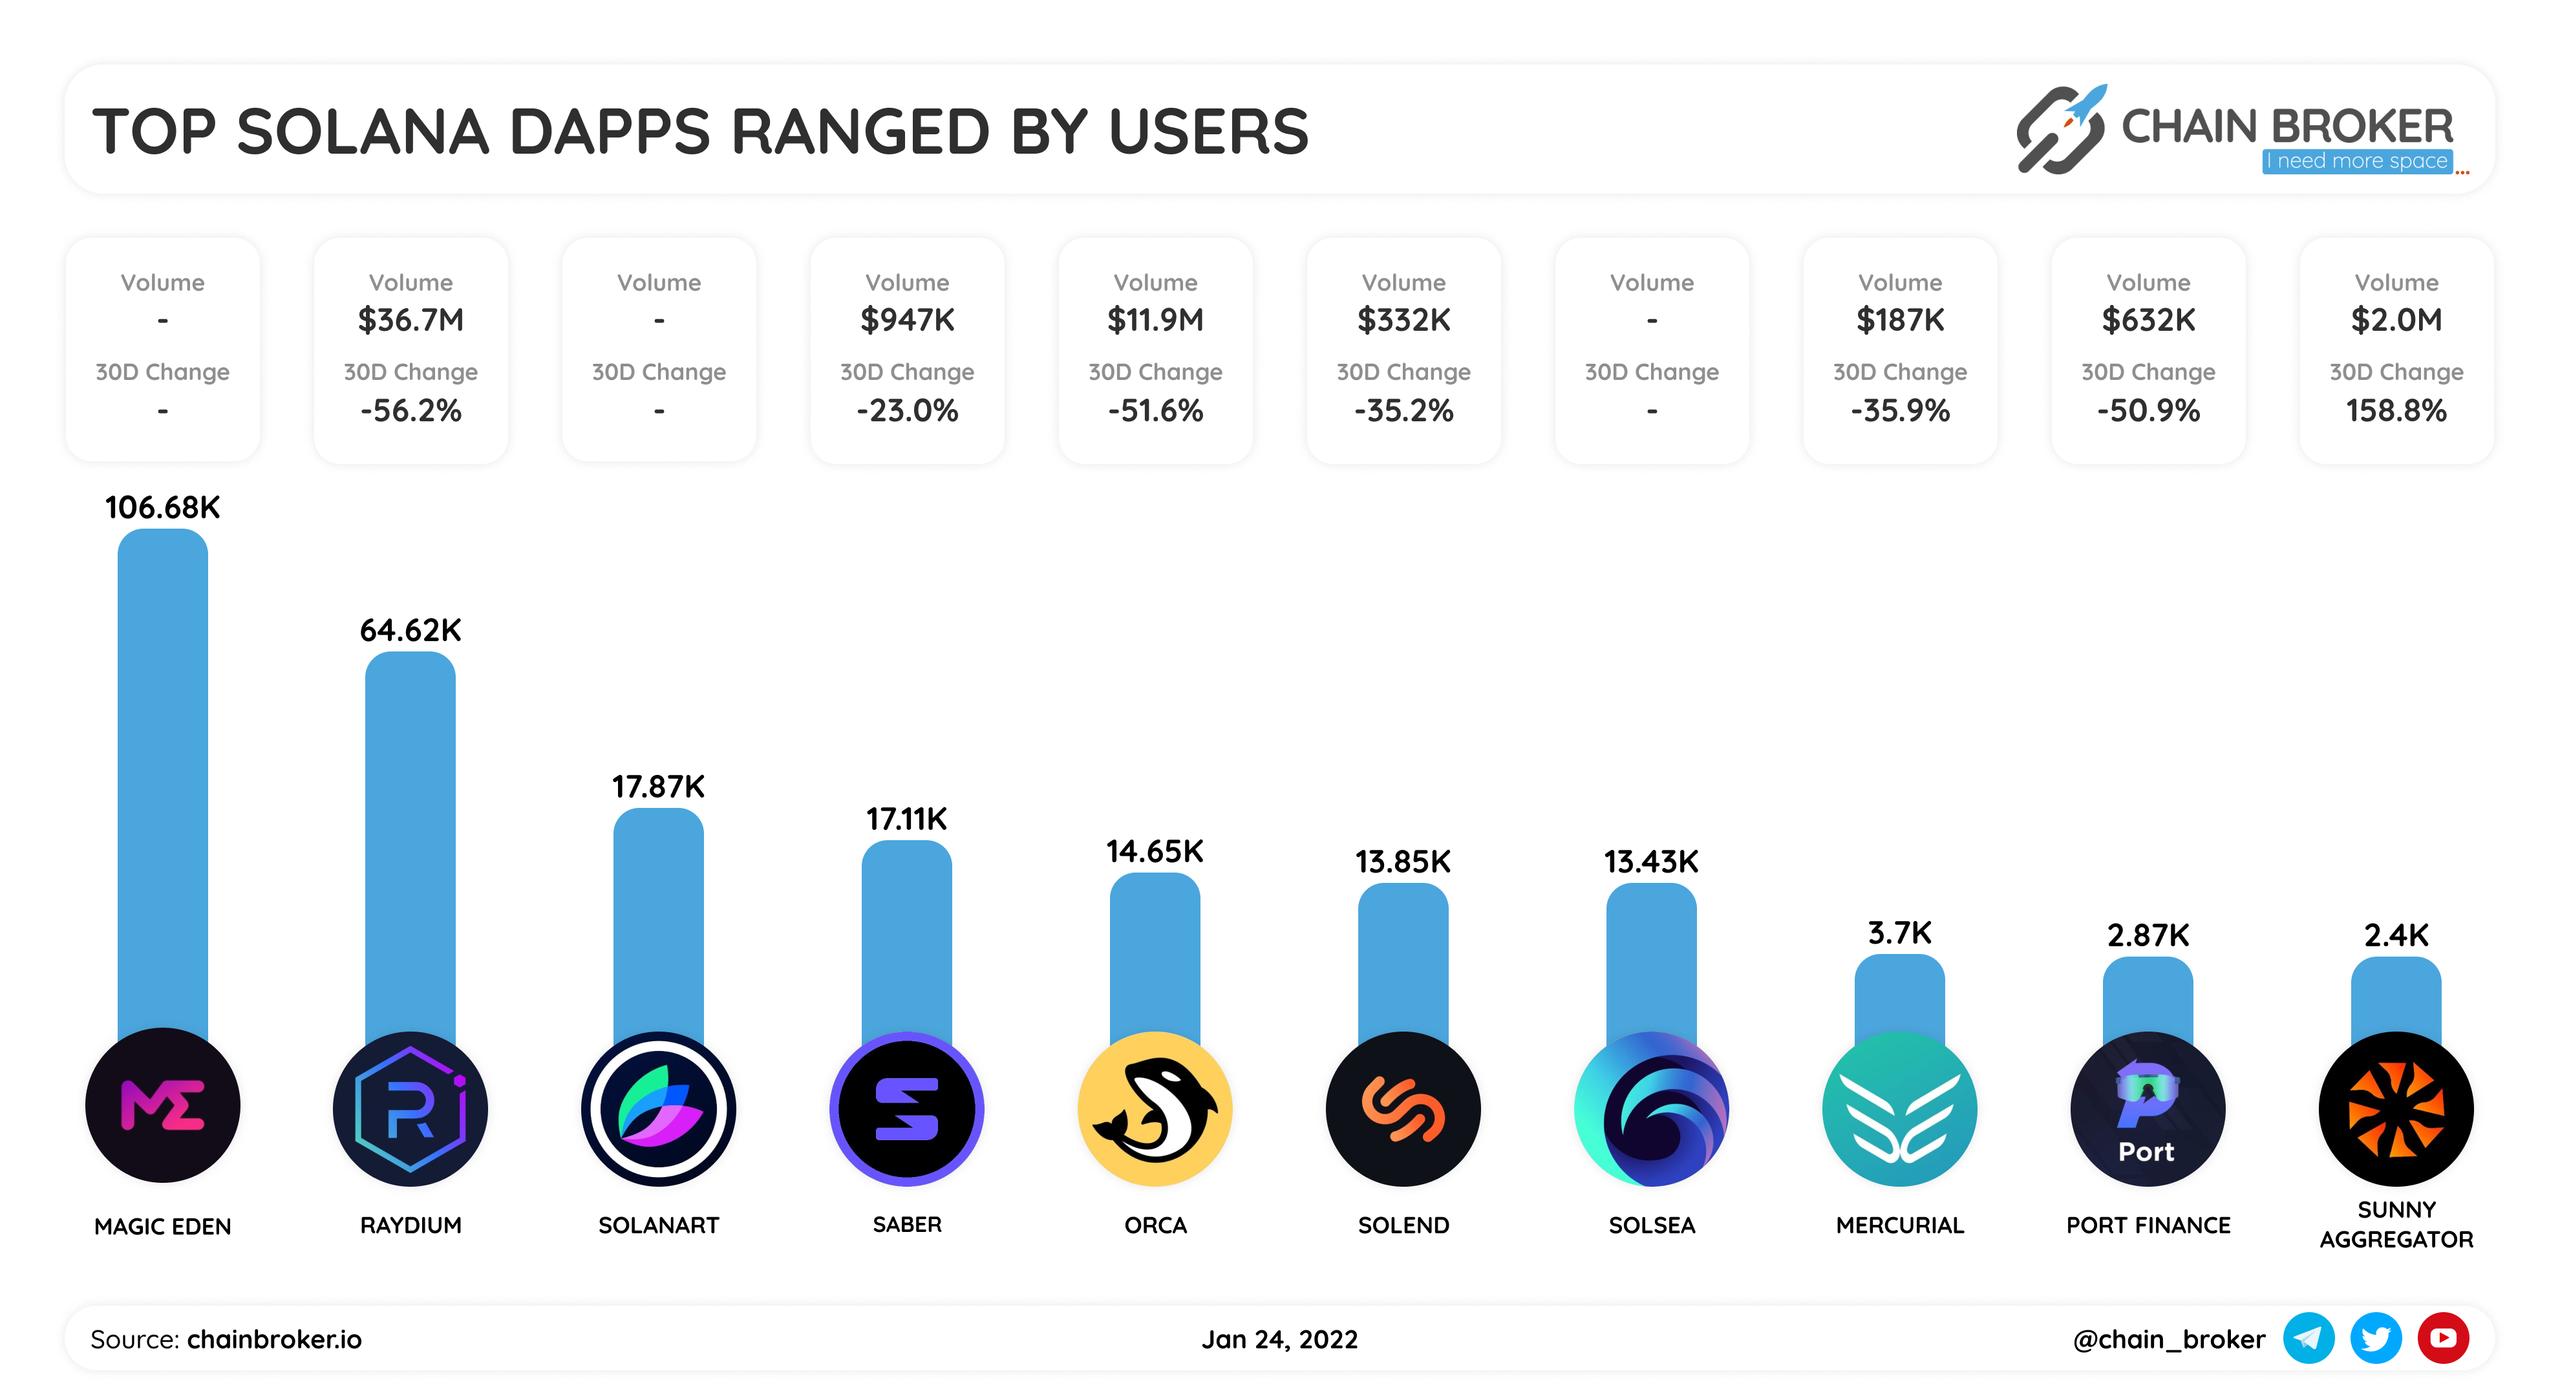 Top Solana dapps ranged by Users